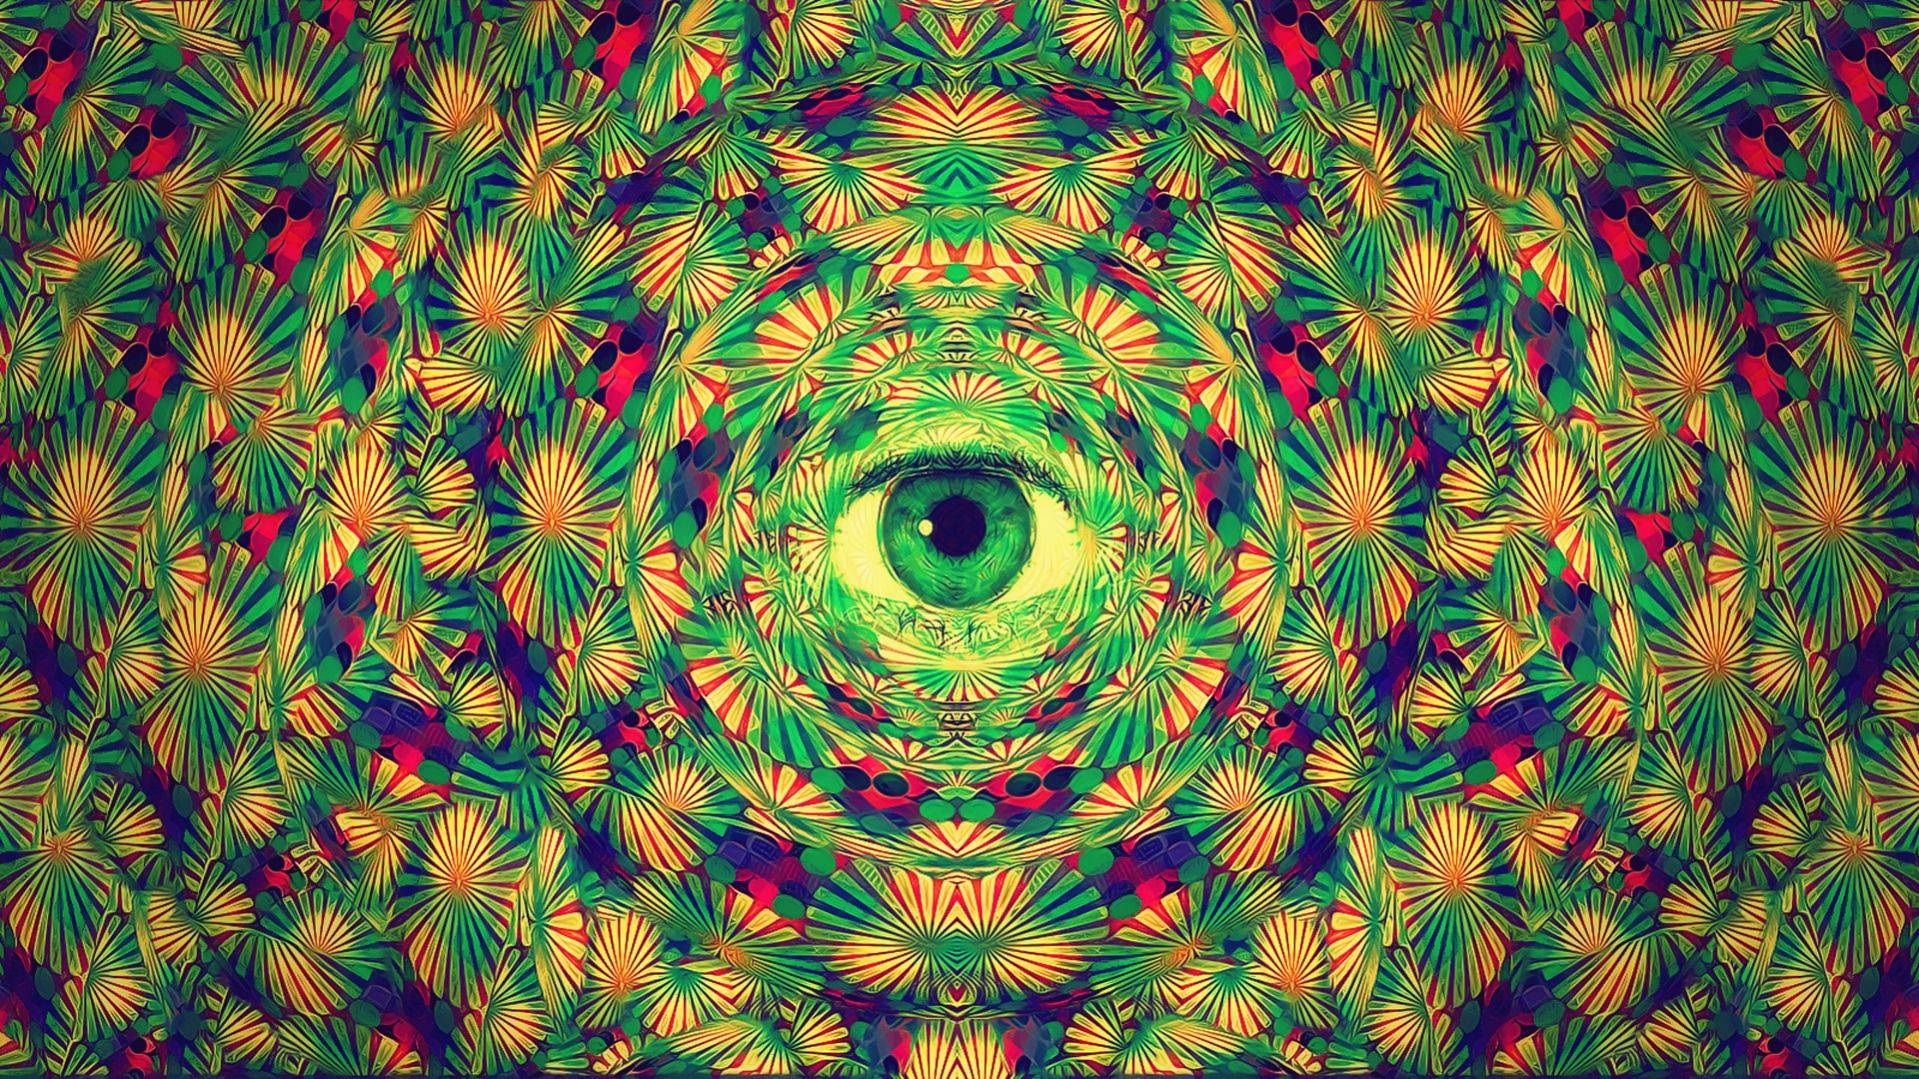 Trippy Psychedelic Backgrounds